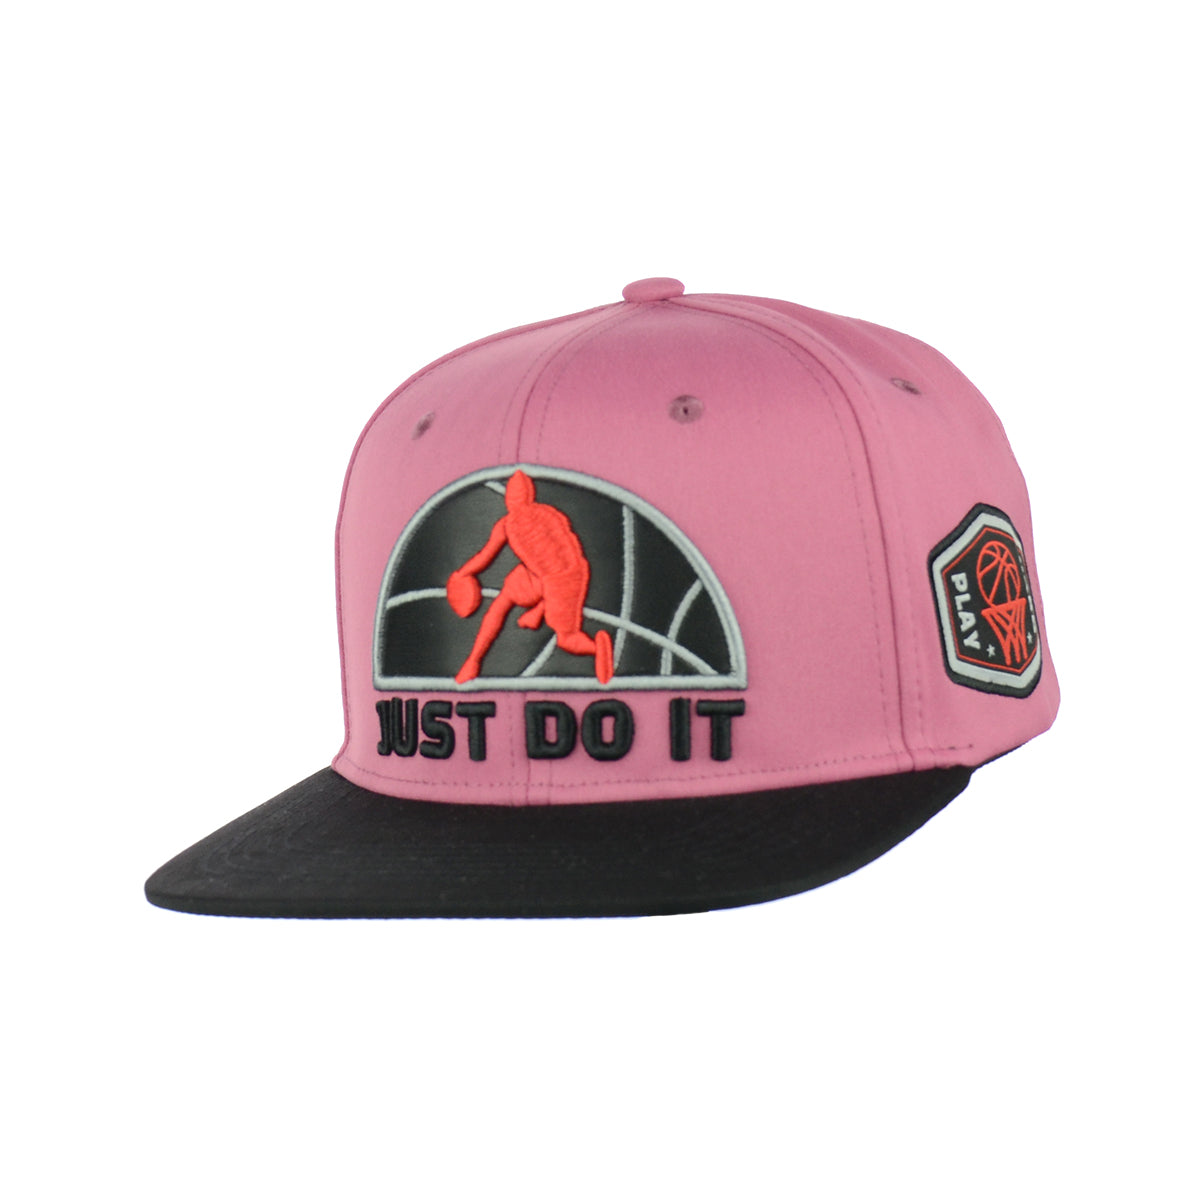 Just Do It Embroidered Snapback Hat